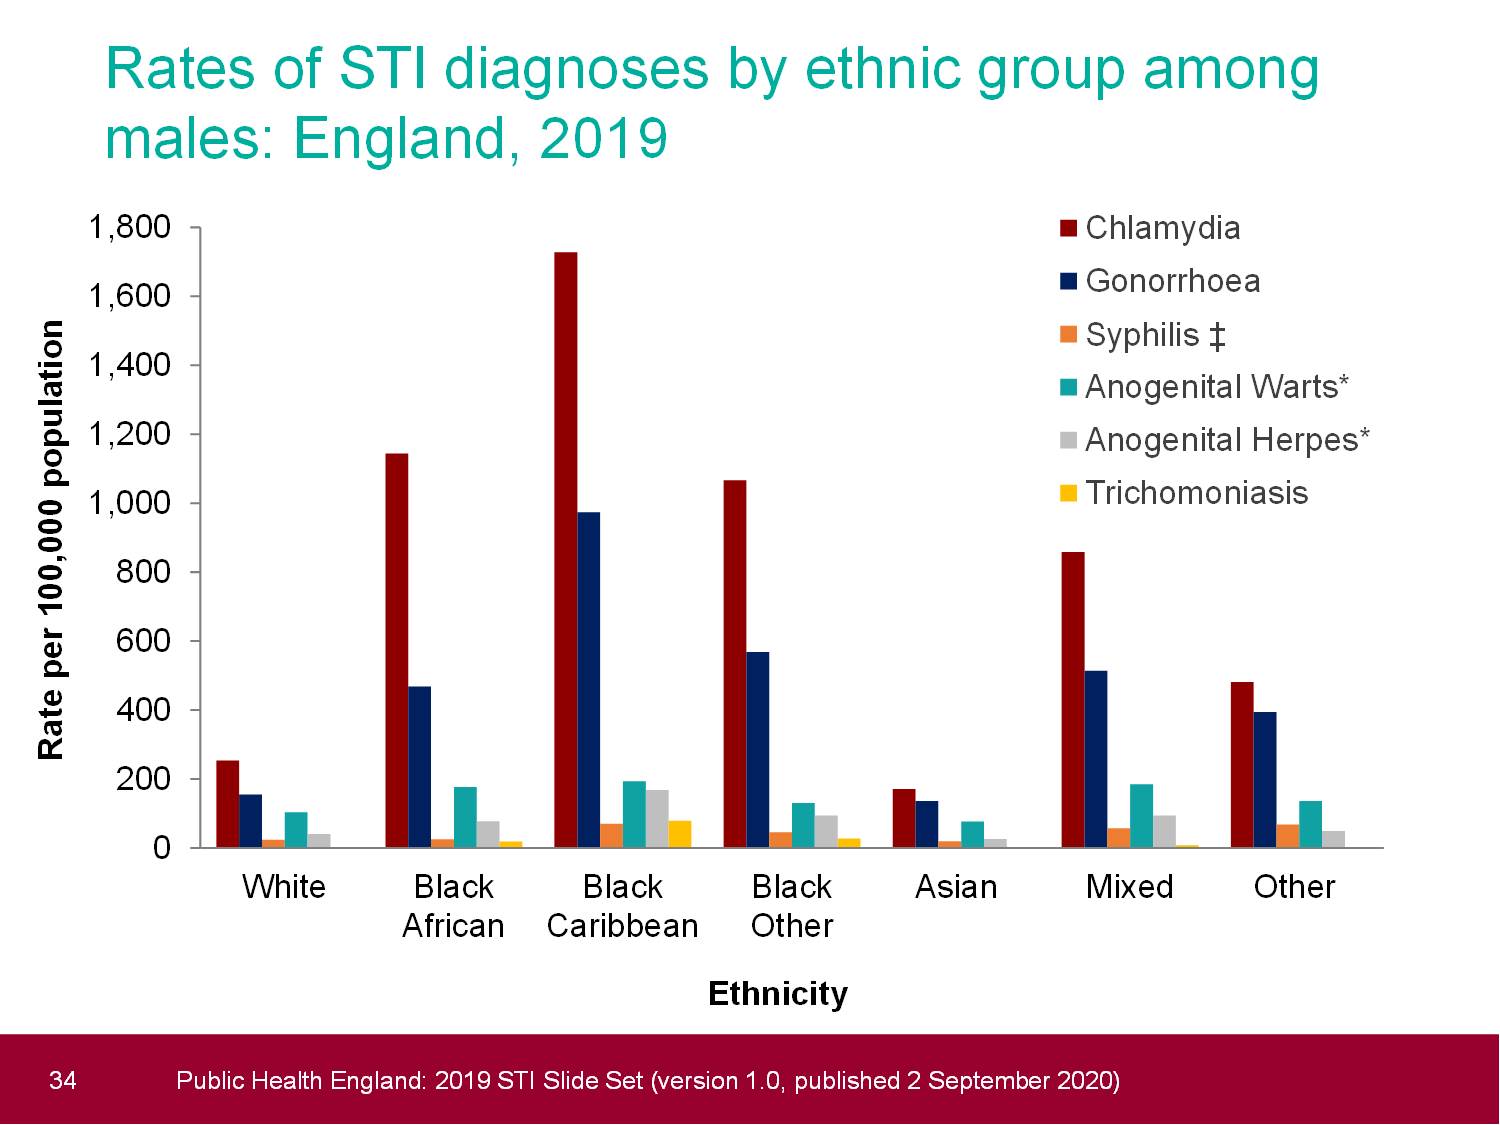 Rates of STI diagnoses by ethnic group among males, England 2019